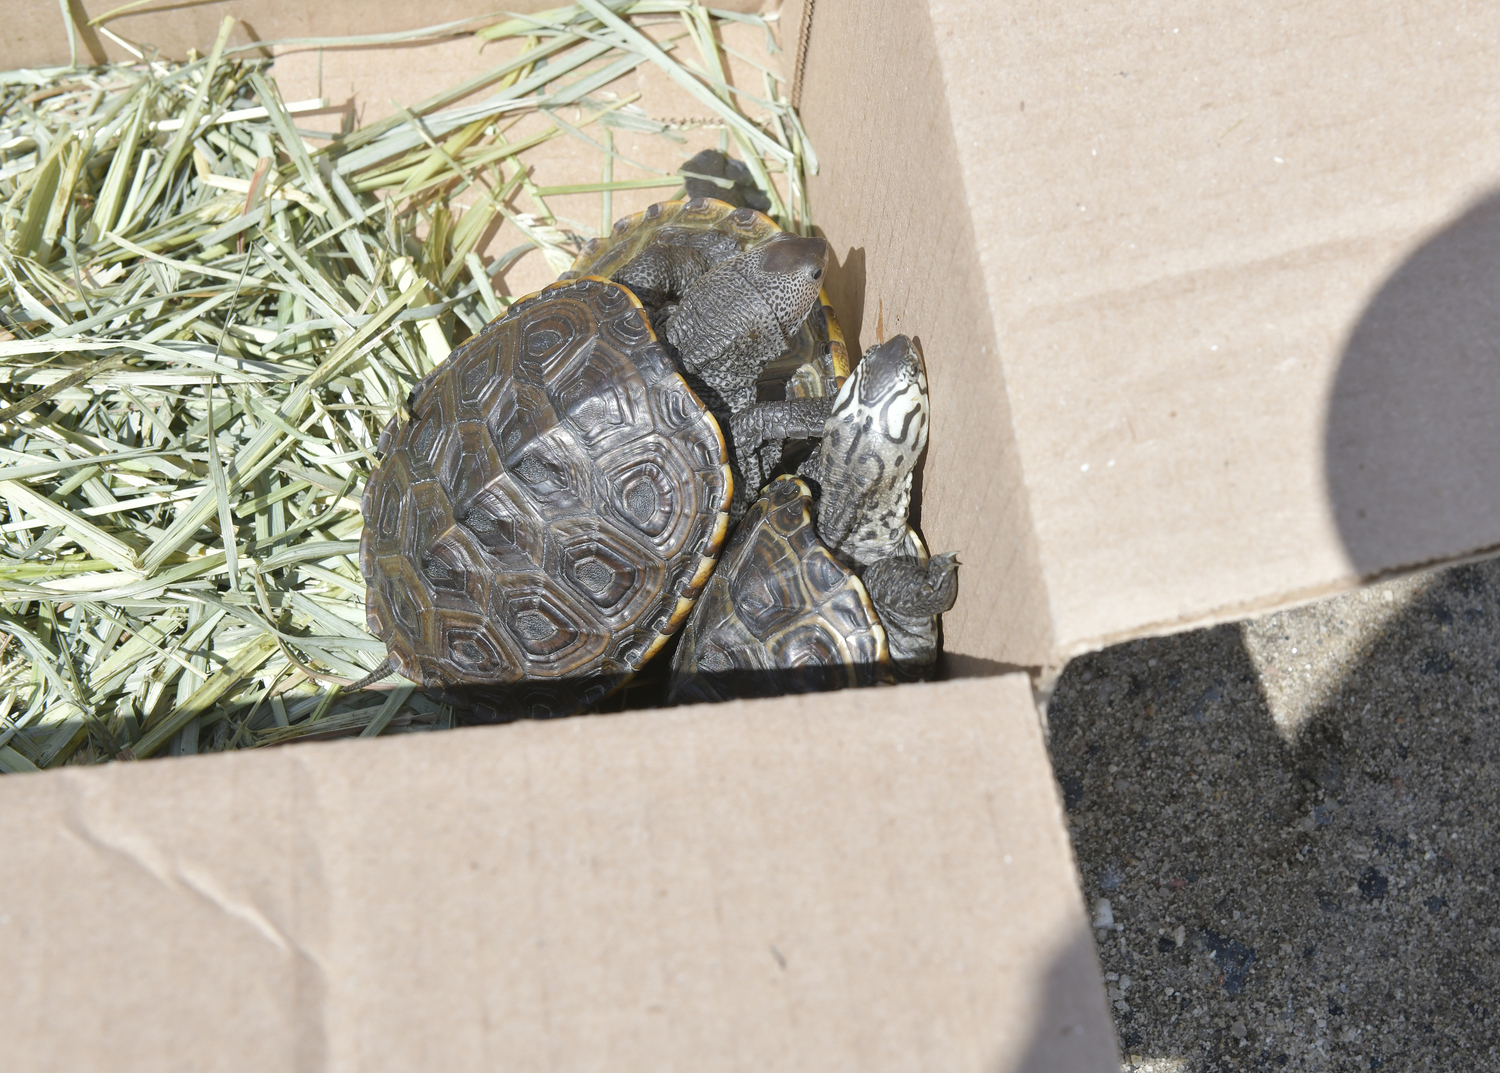 Baby diamondback terrapins that hatched in the spring at the Turtle Rescue of the Hamptons in Jamesport were released on Friday at Scallop Pond.  DANA SHAW